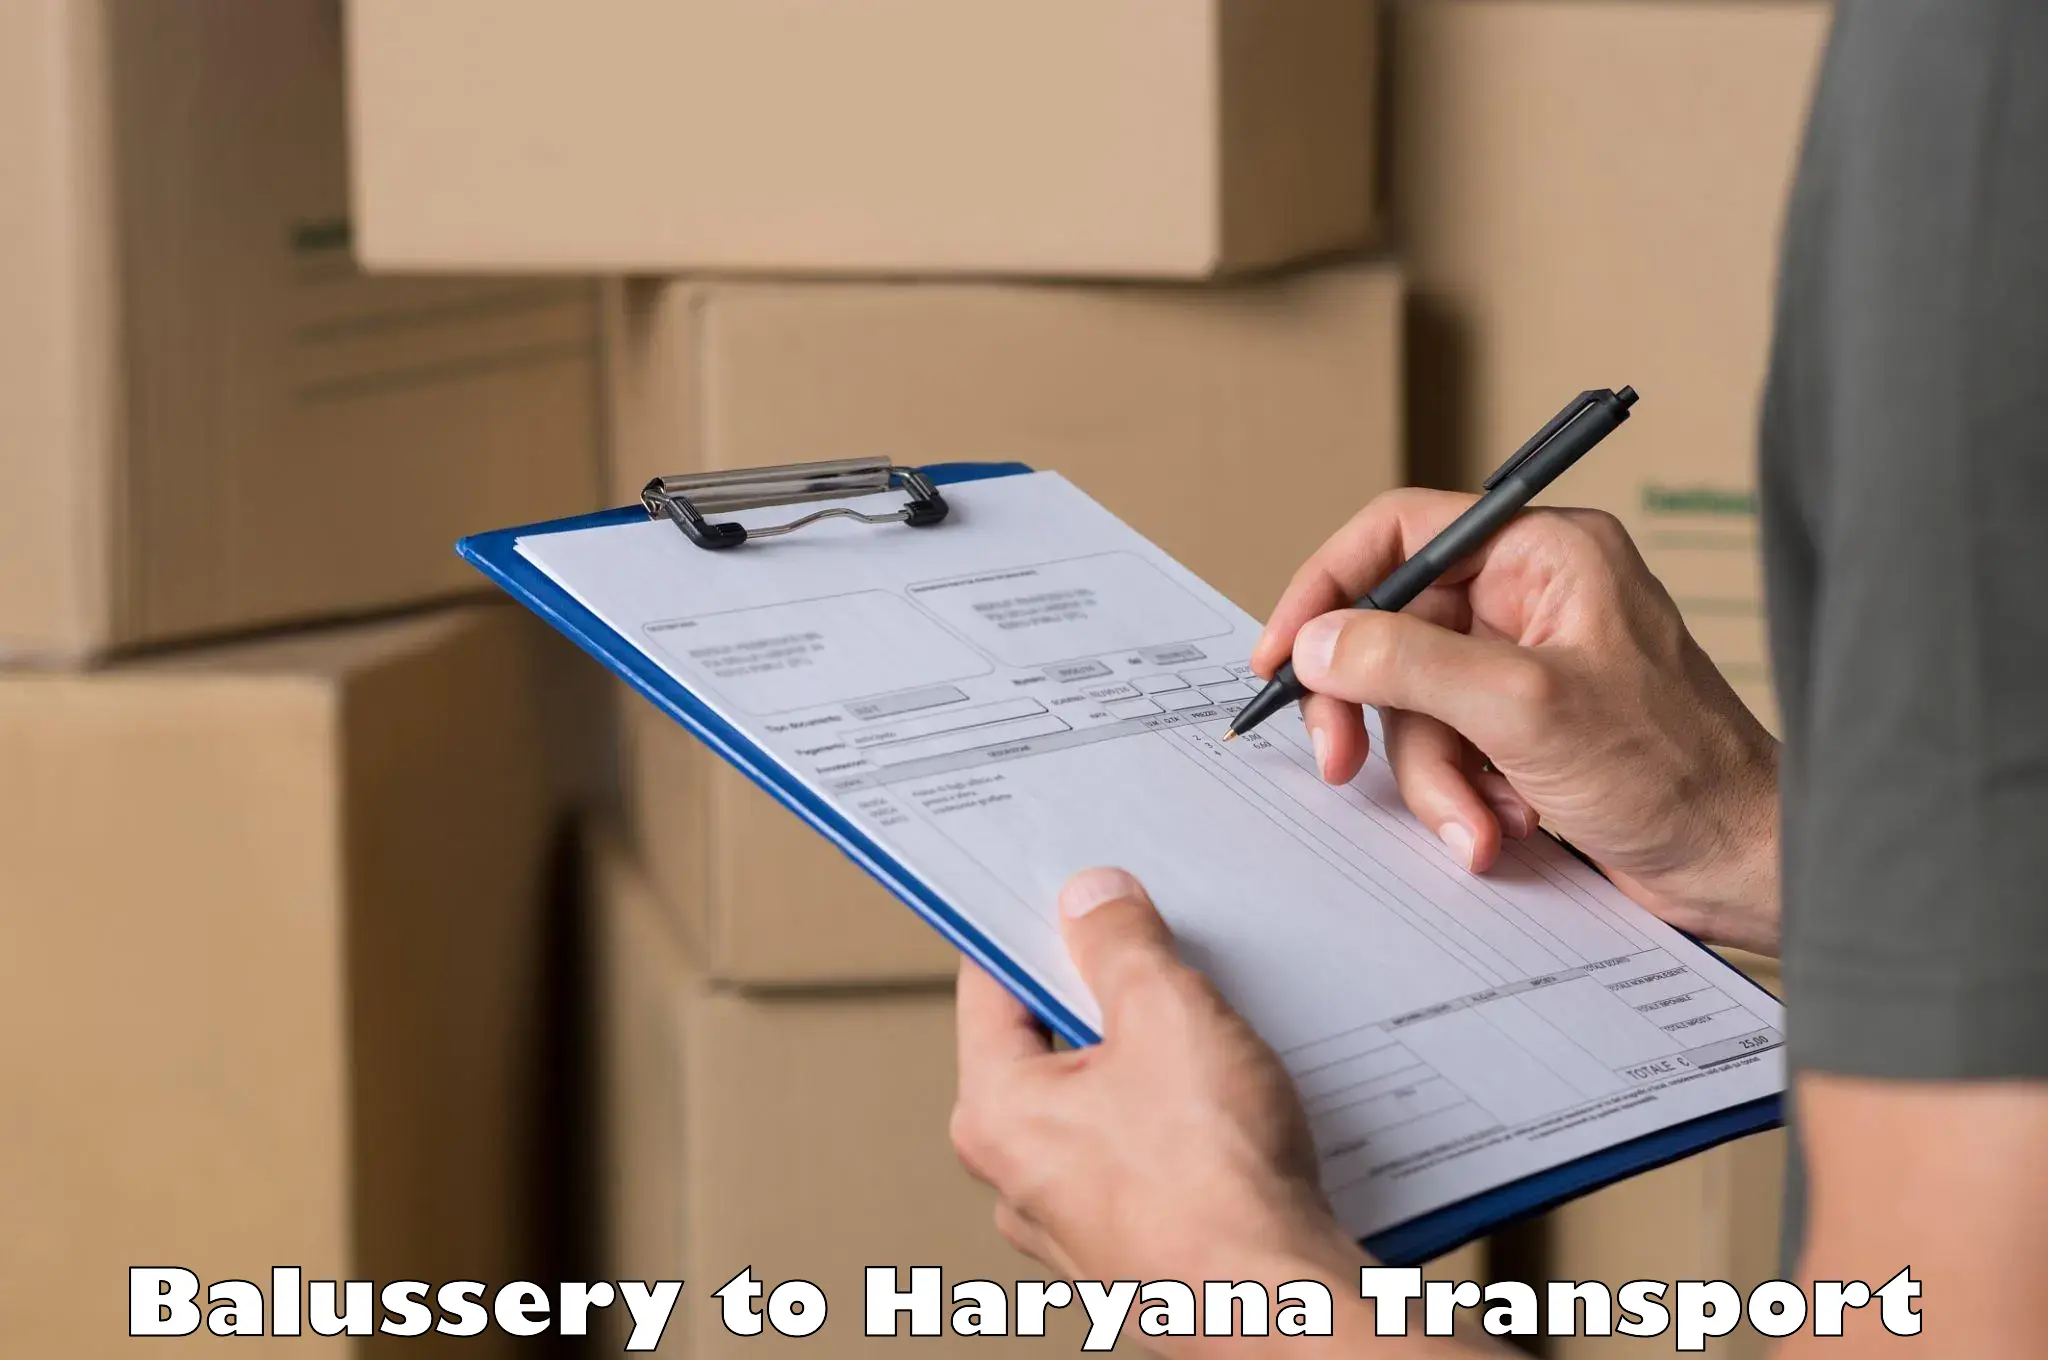 Furniture transport service Balussery to Haryana